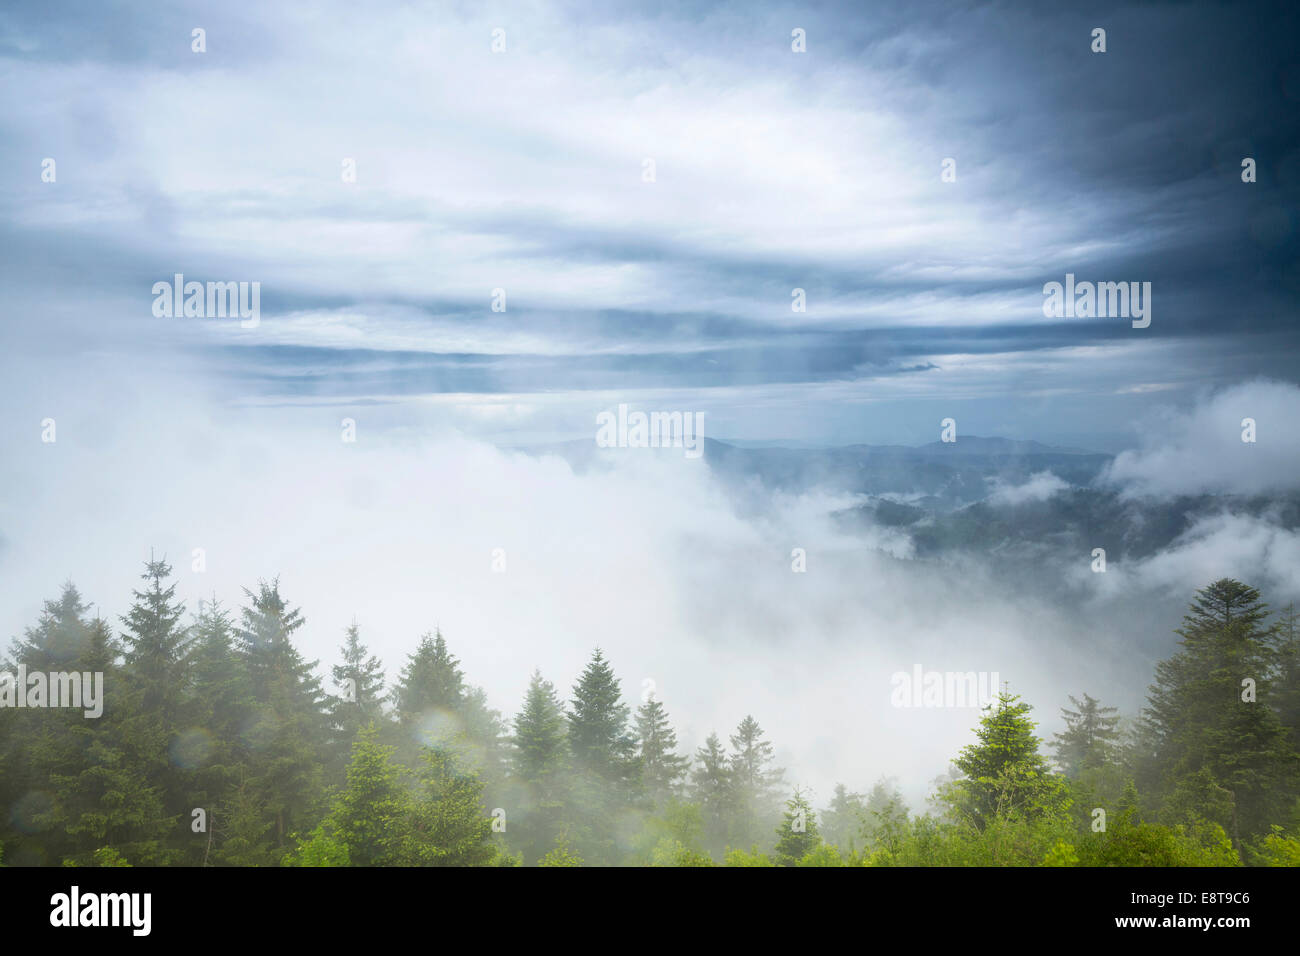 Stormy atmosphere with fog after heavy rain falls on the Schliffkopf mountain, Black Forest, Baden-Württemberg, Germany Stock Photo